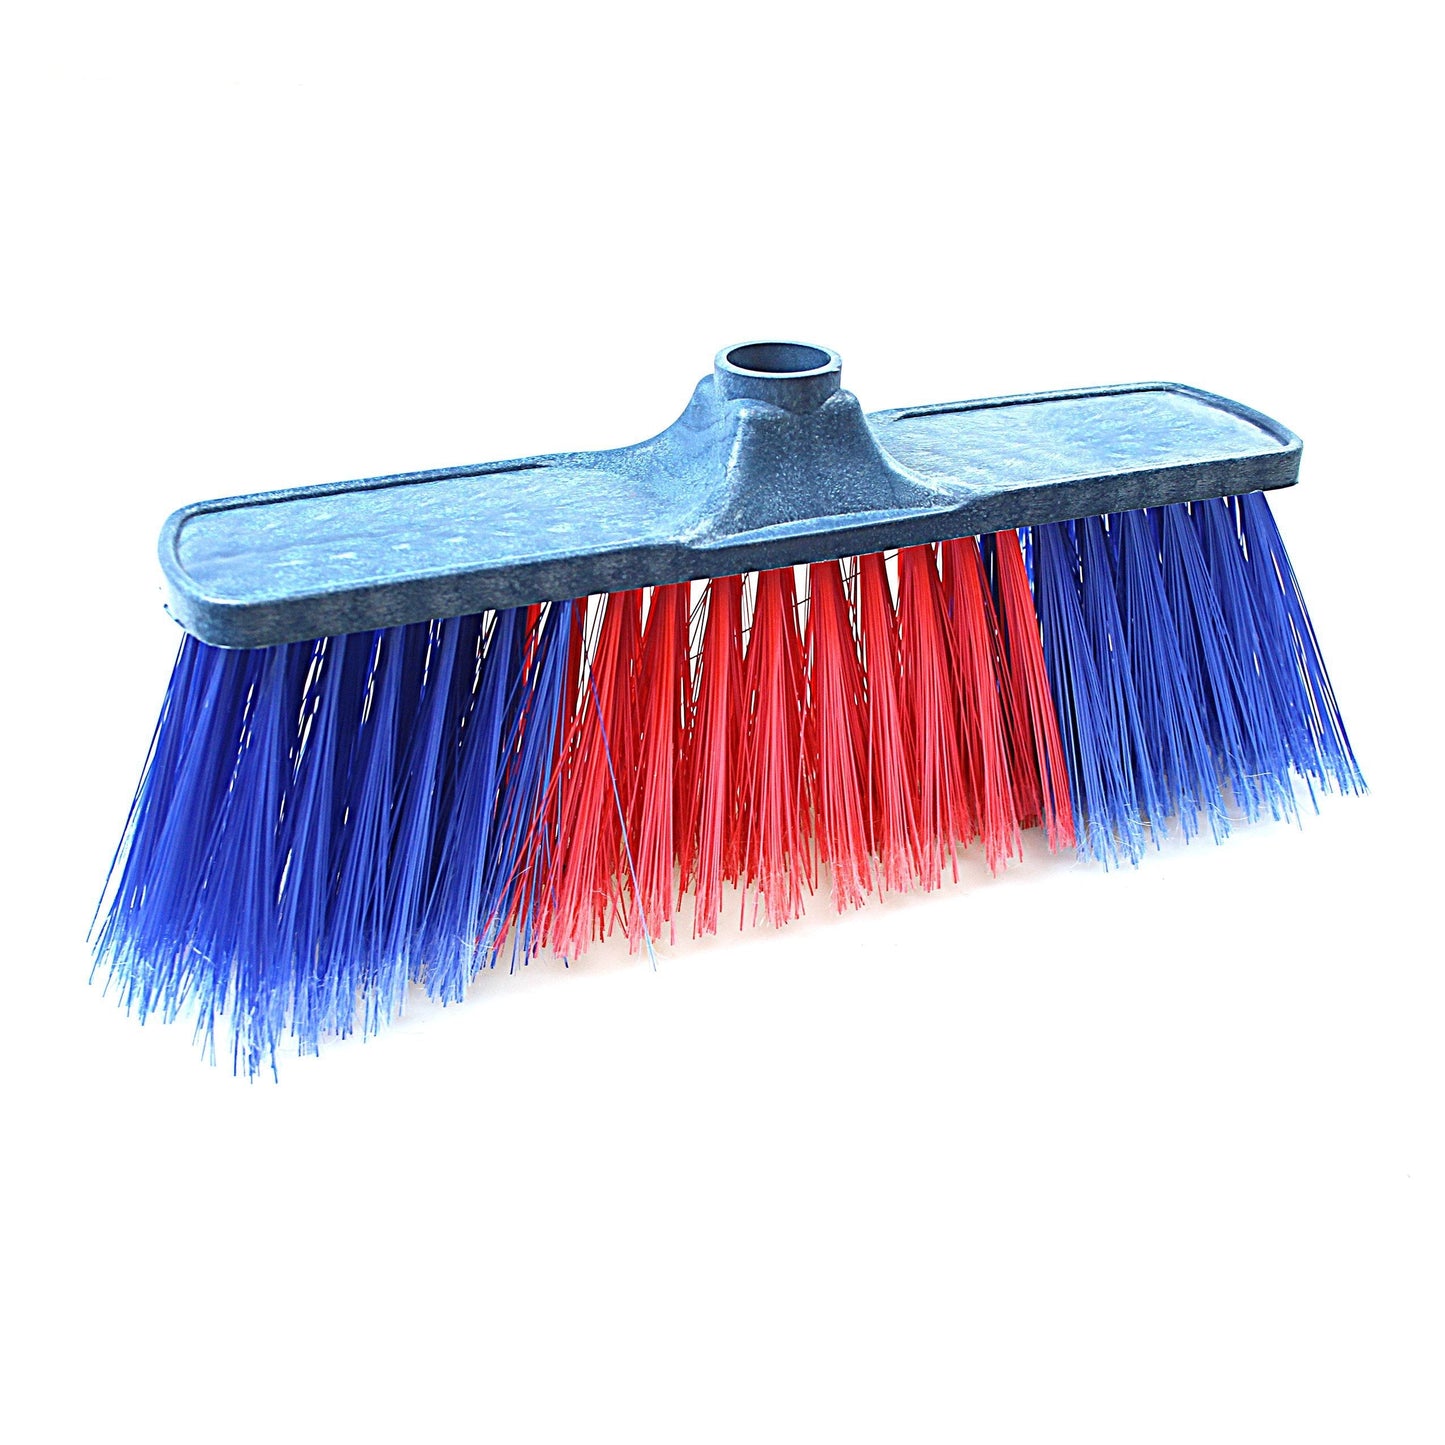 Replacement Plastic Bristle Brush Cleaning Sweeping Brush Head 8310 (Parcel Rate)